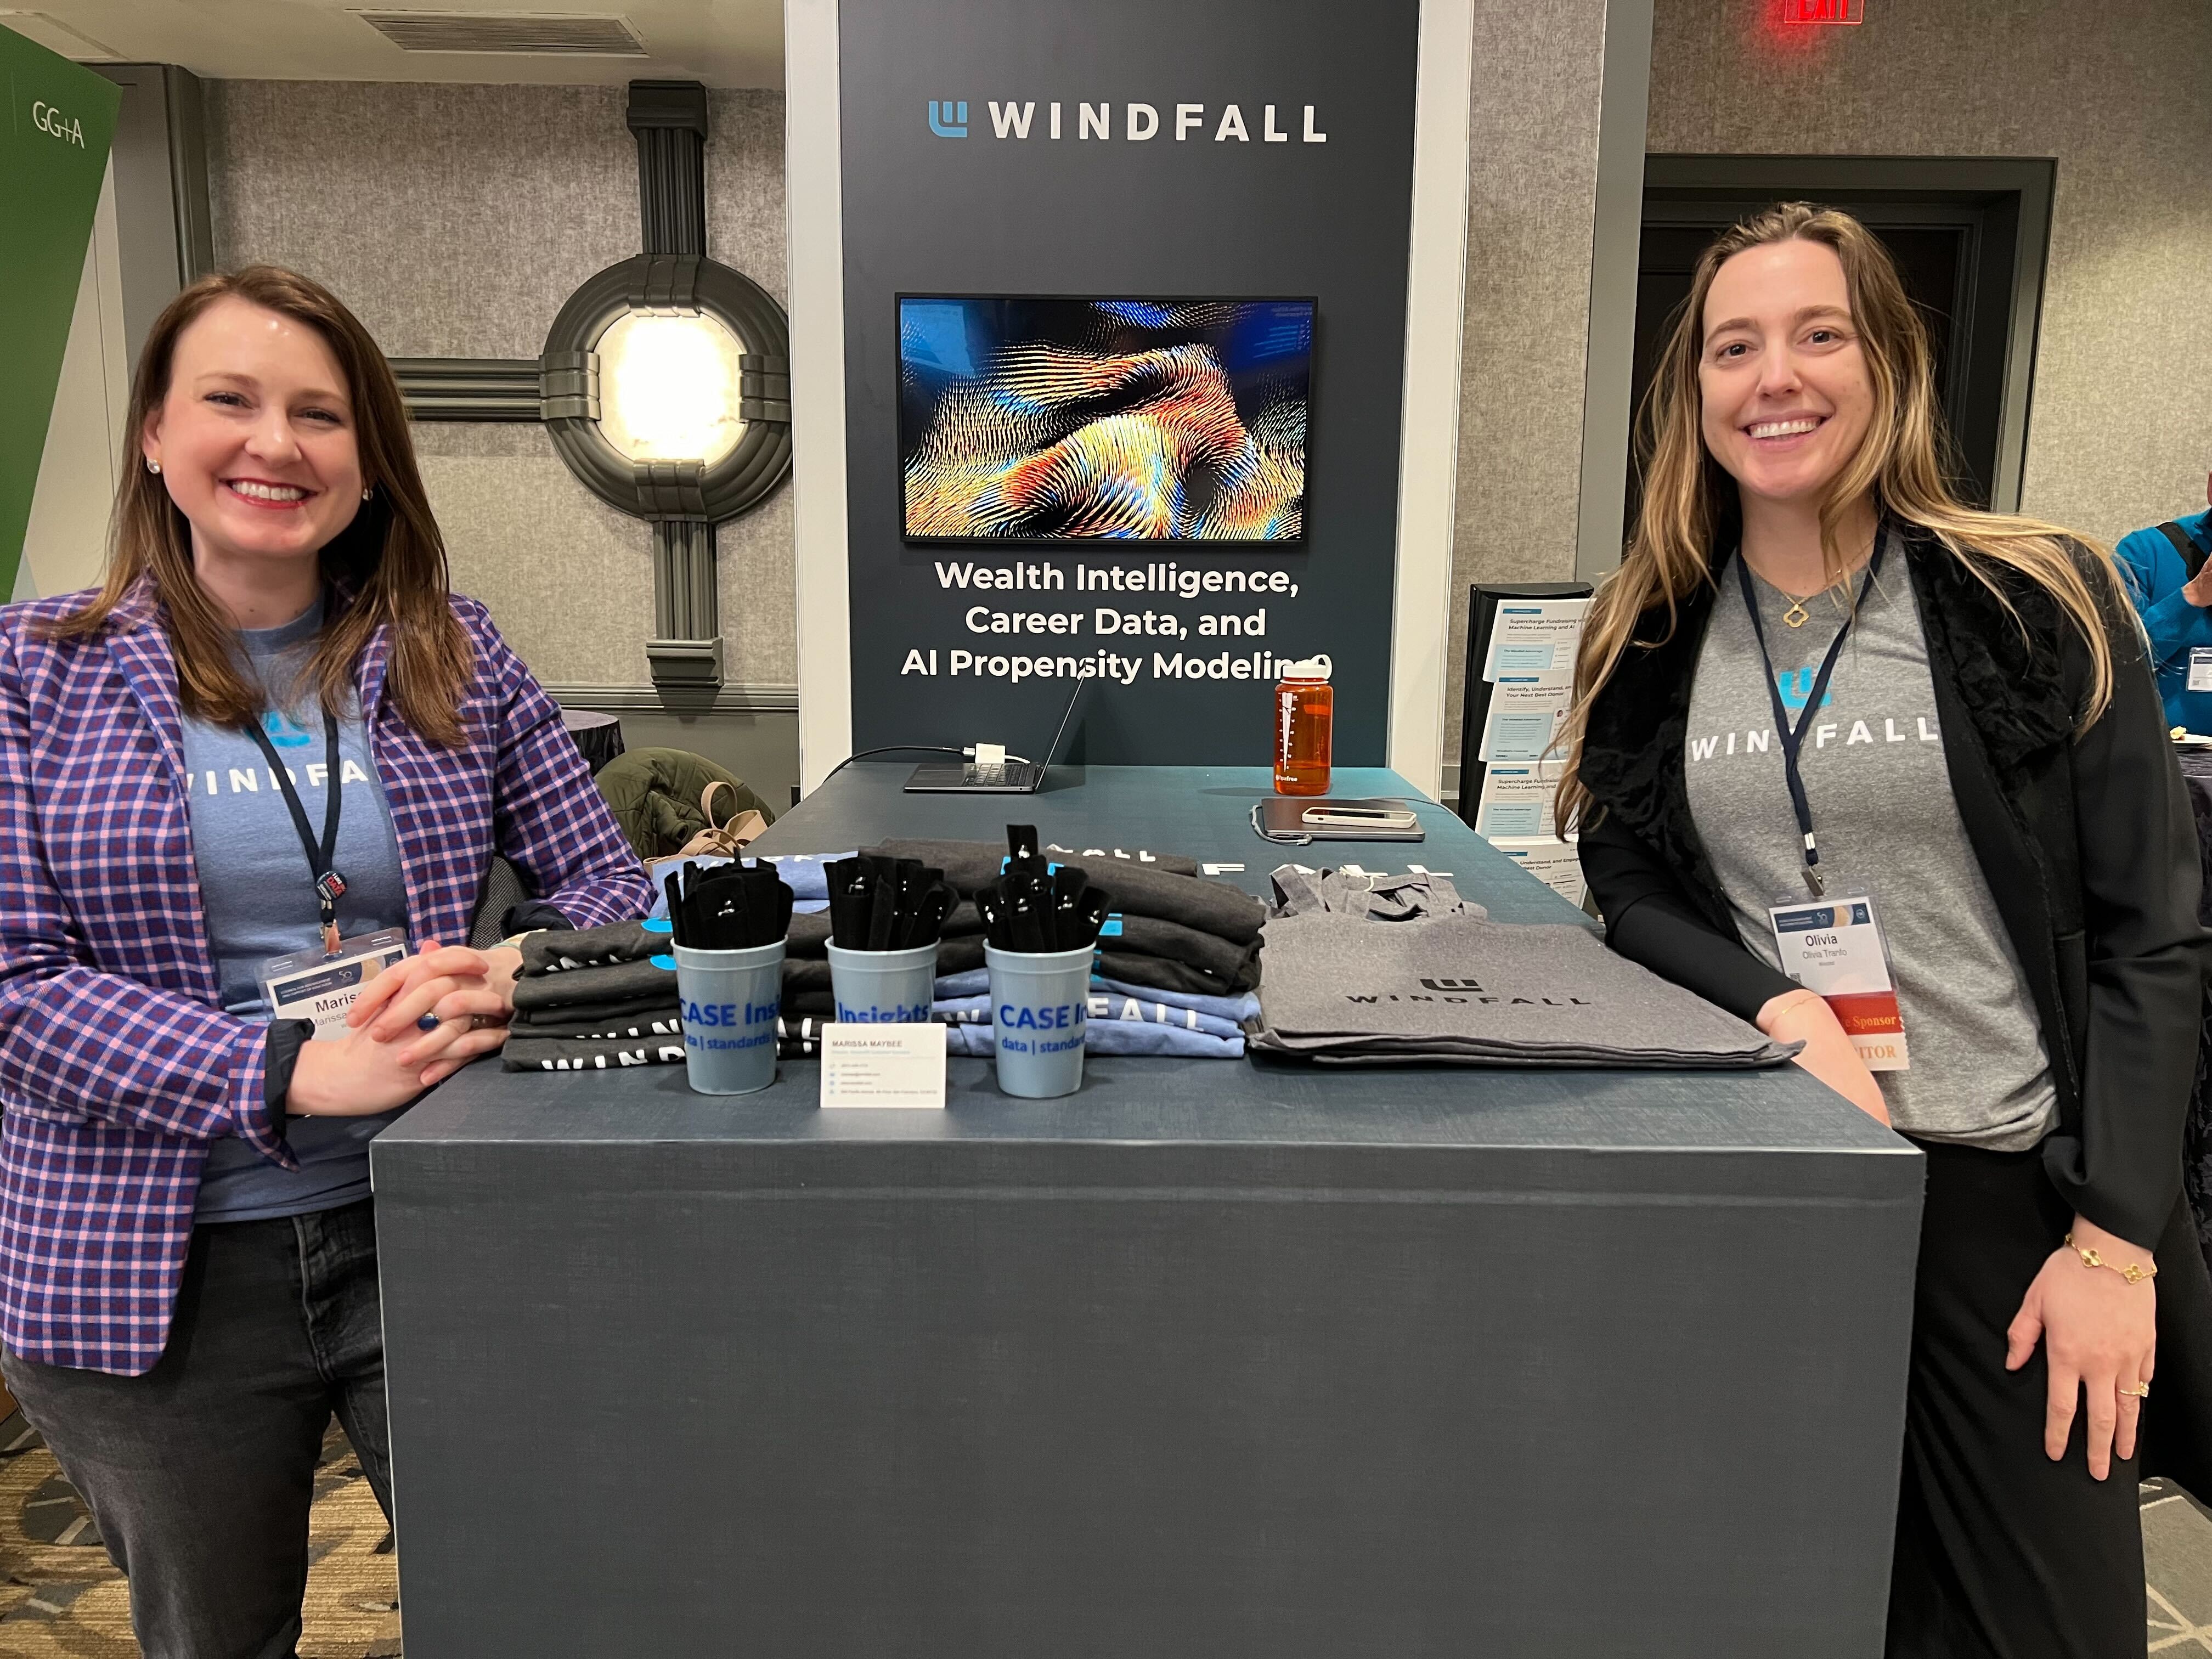 Employees in front of a Windfall booth at conference